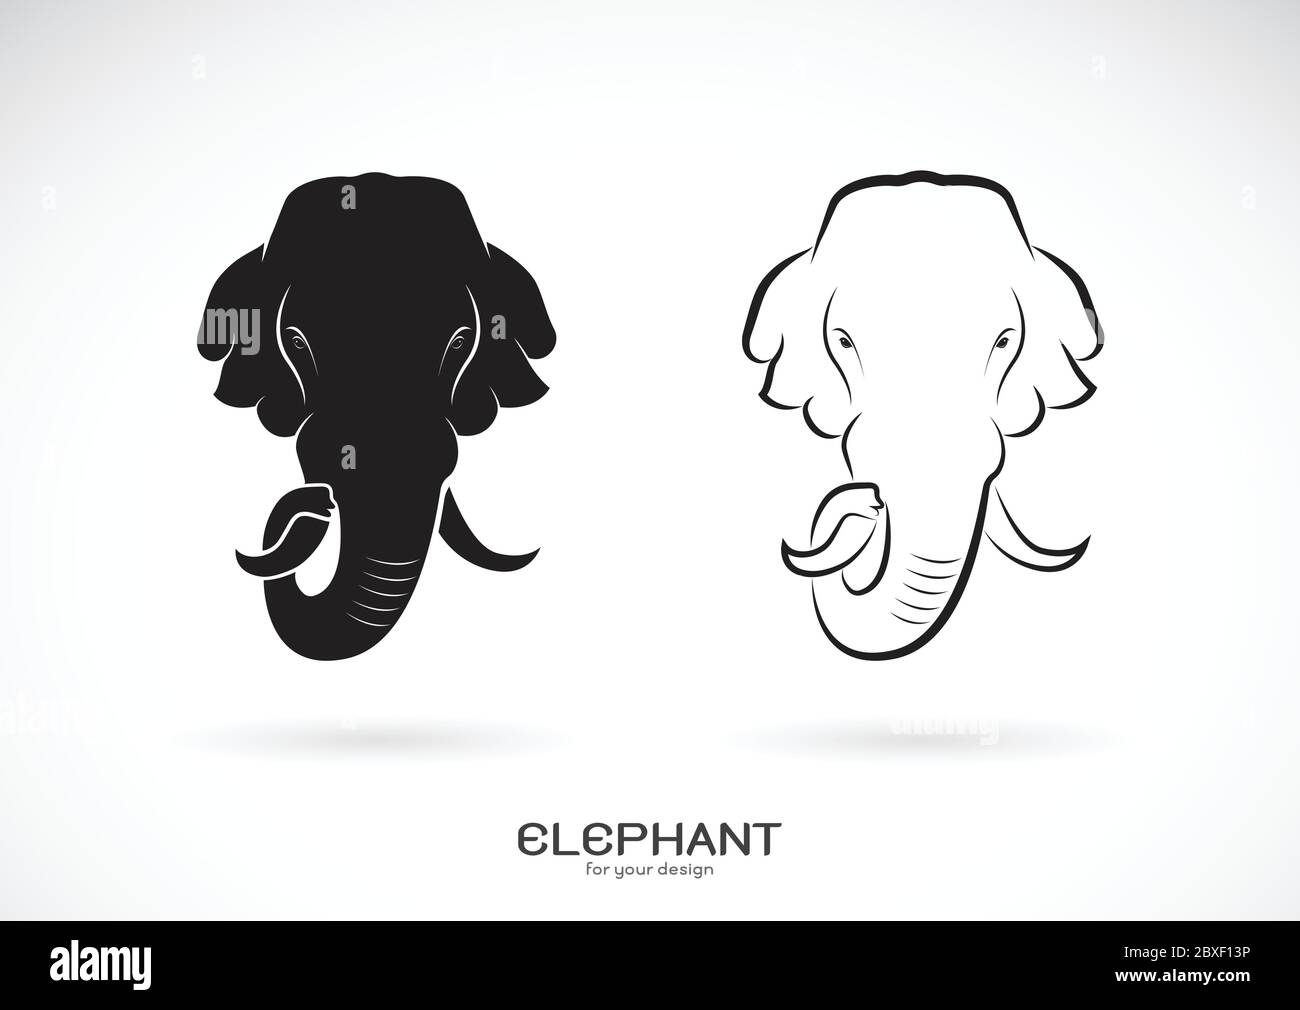 Vector of elephant head design on white background. Wild Animals. Elephants logos or icons. Easy editable layered vector illustration. Stock Vector